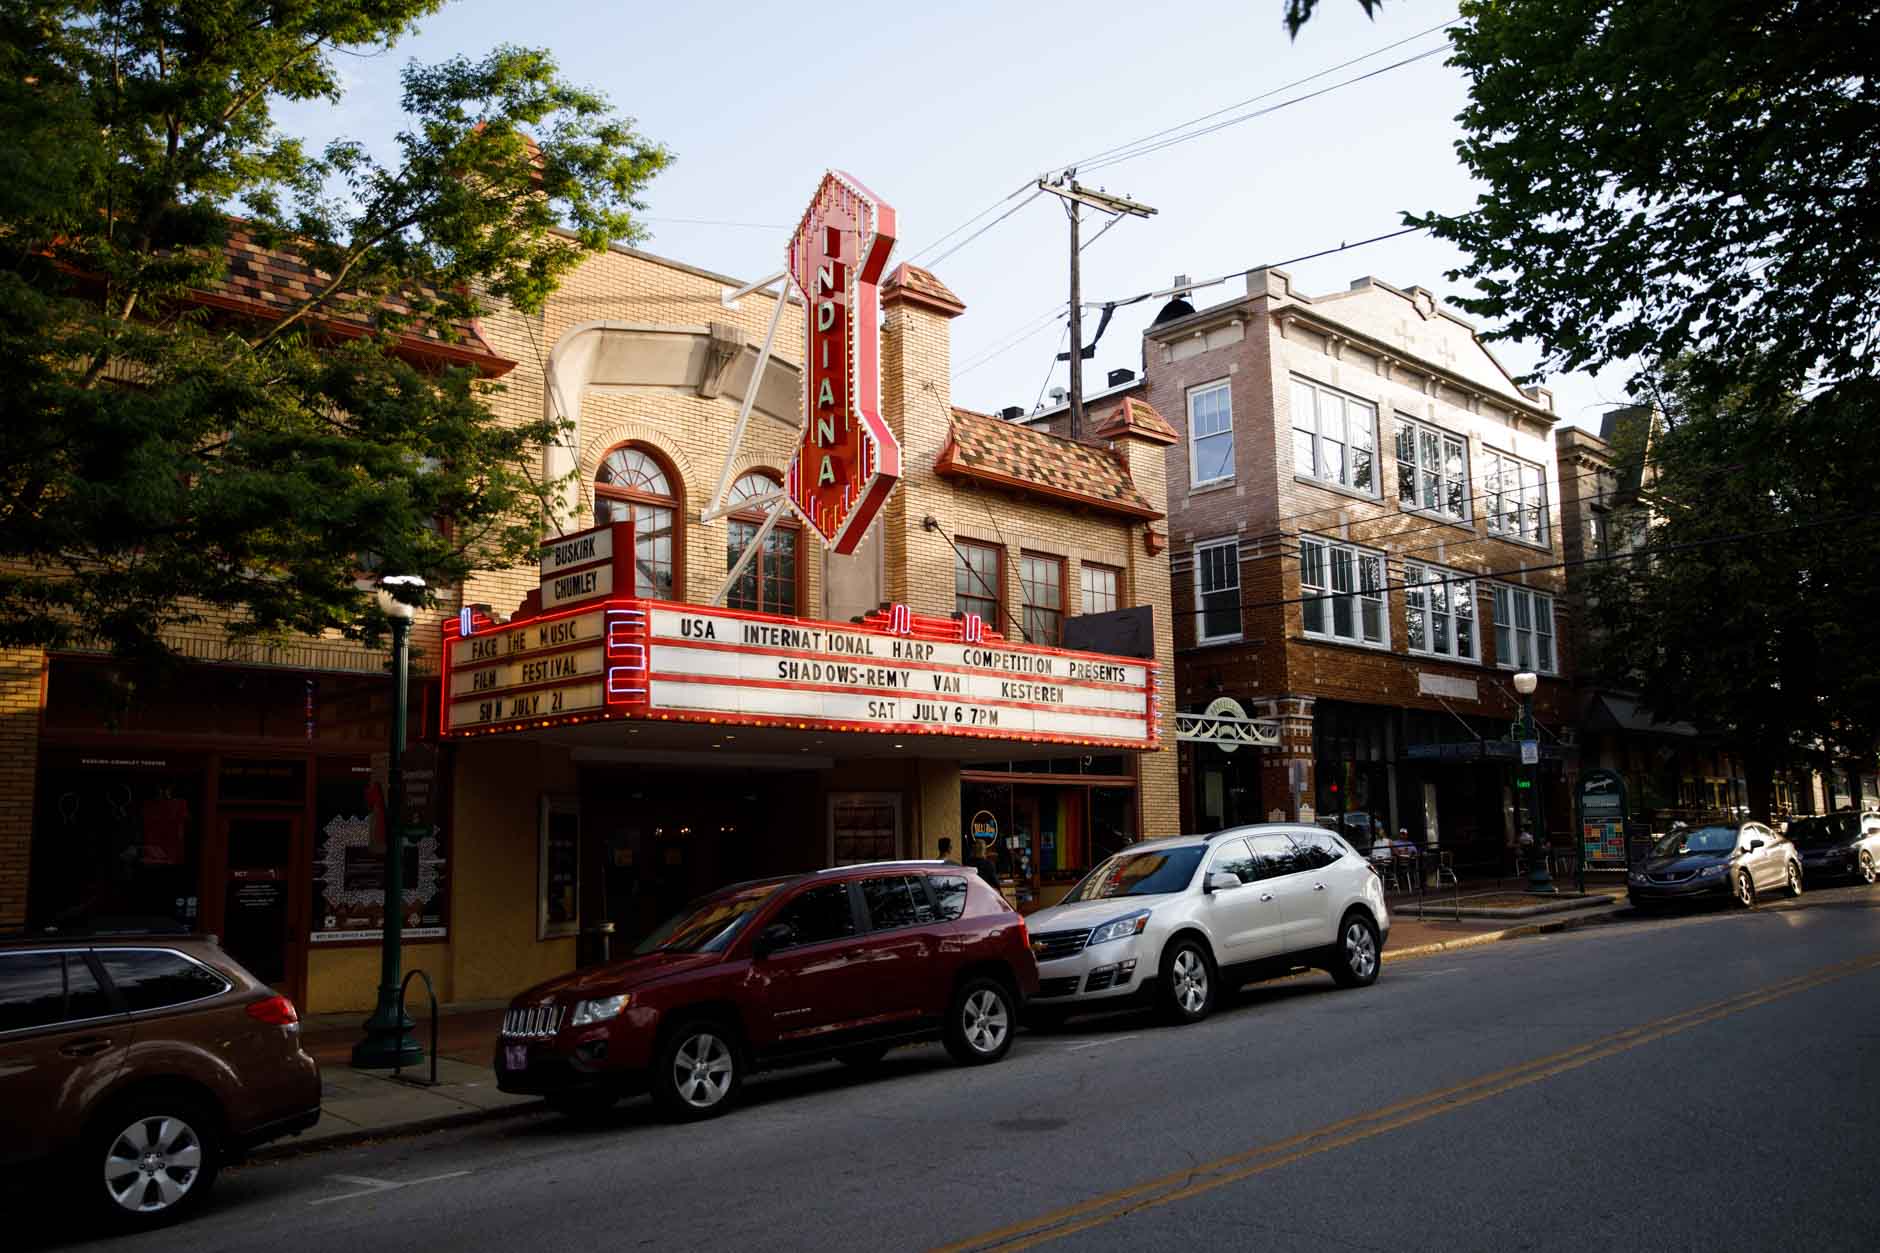 The marquee of the Buskirk-Chumley Theater announces a laureate recital by harpist Remy van Kesteren as part of the 11th USA International Harp Competition in Bloomington, Indiana on Saturday, July 6, 2019. (Photo by James Brosher)